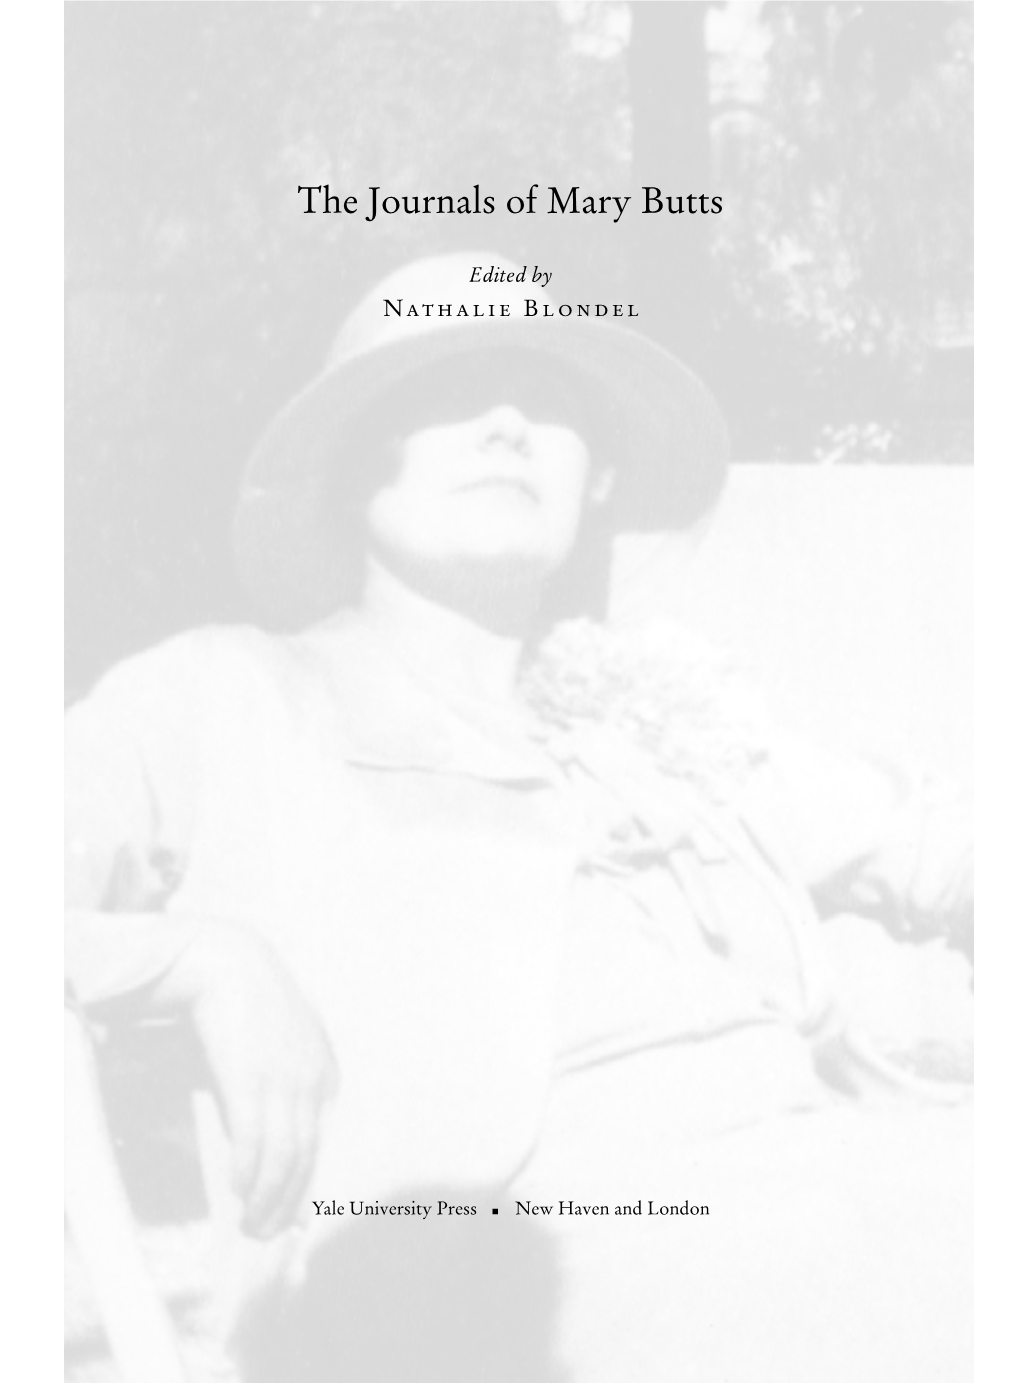 The Journals of Mary Butts